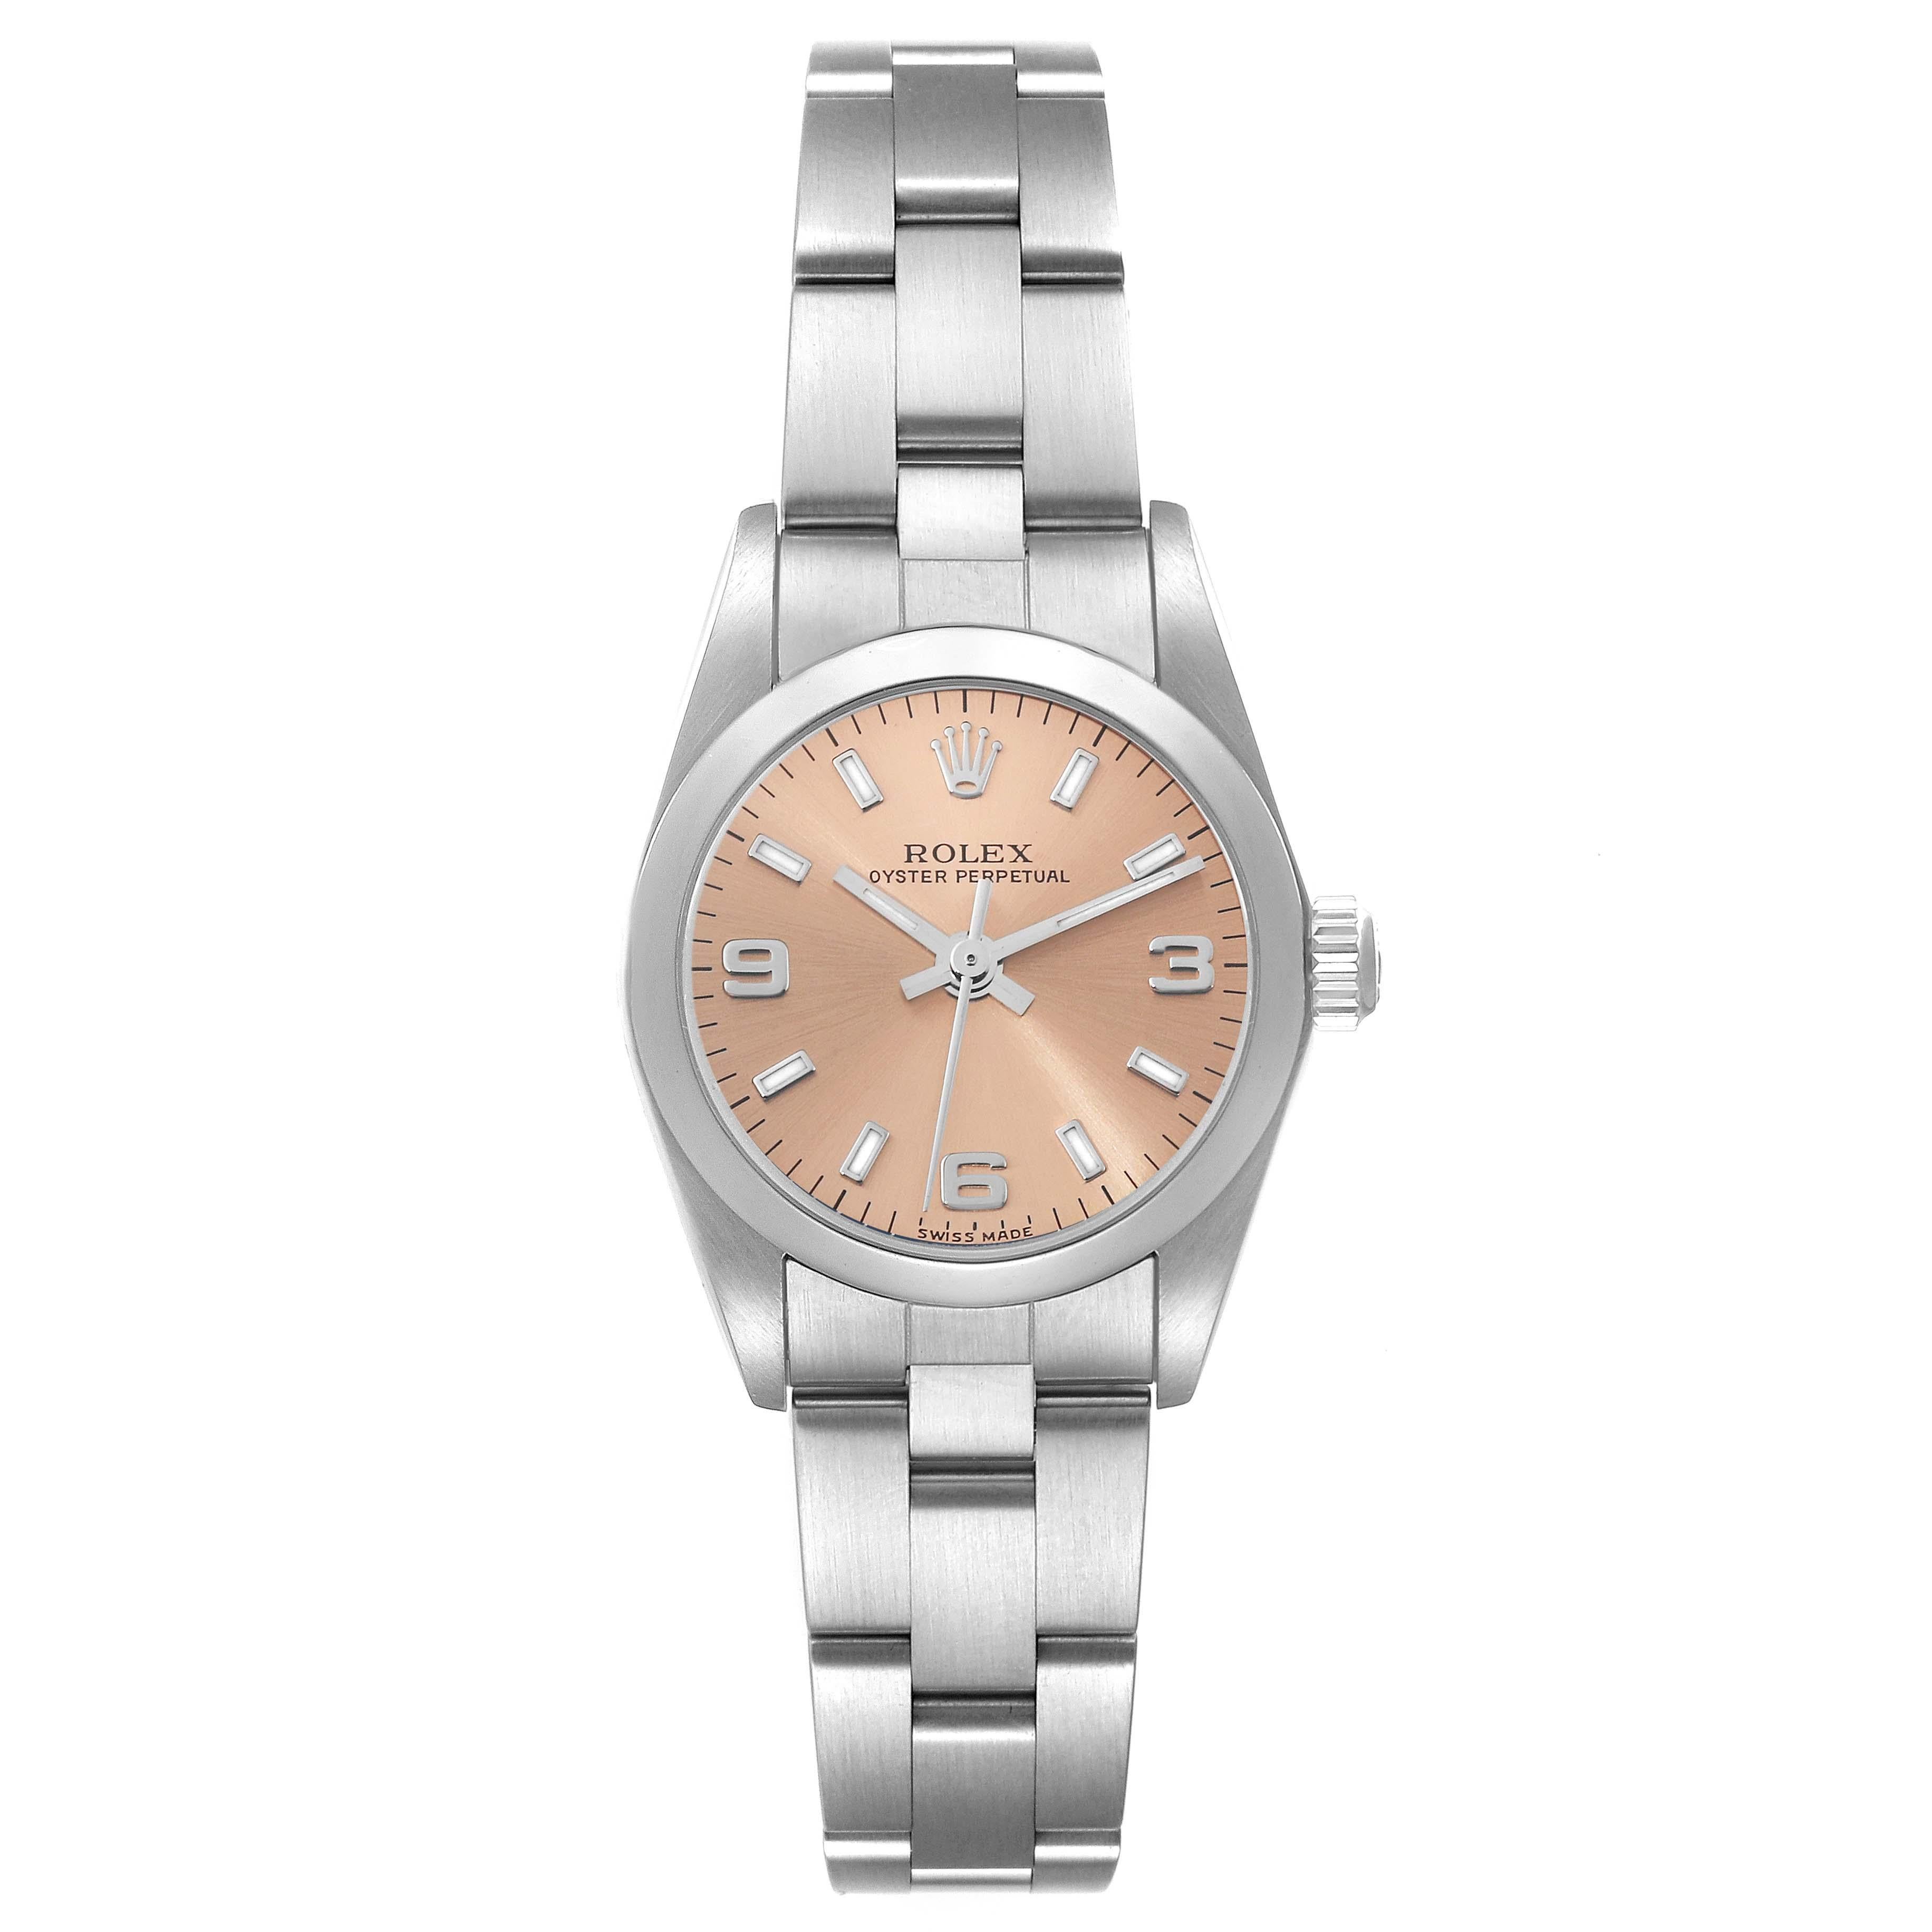 Rolex Oyster Perpetual Salmon Dial Steel Ladies Watch 76080 Box Papers. Officially certified chronometer automatic self-winding movement. Stainless steel oyster case 24.0 mm in diameter. Rolex logo on the crown. Stainless steel smooth bezel. Scratch